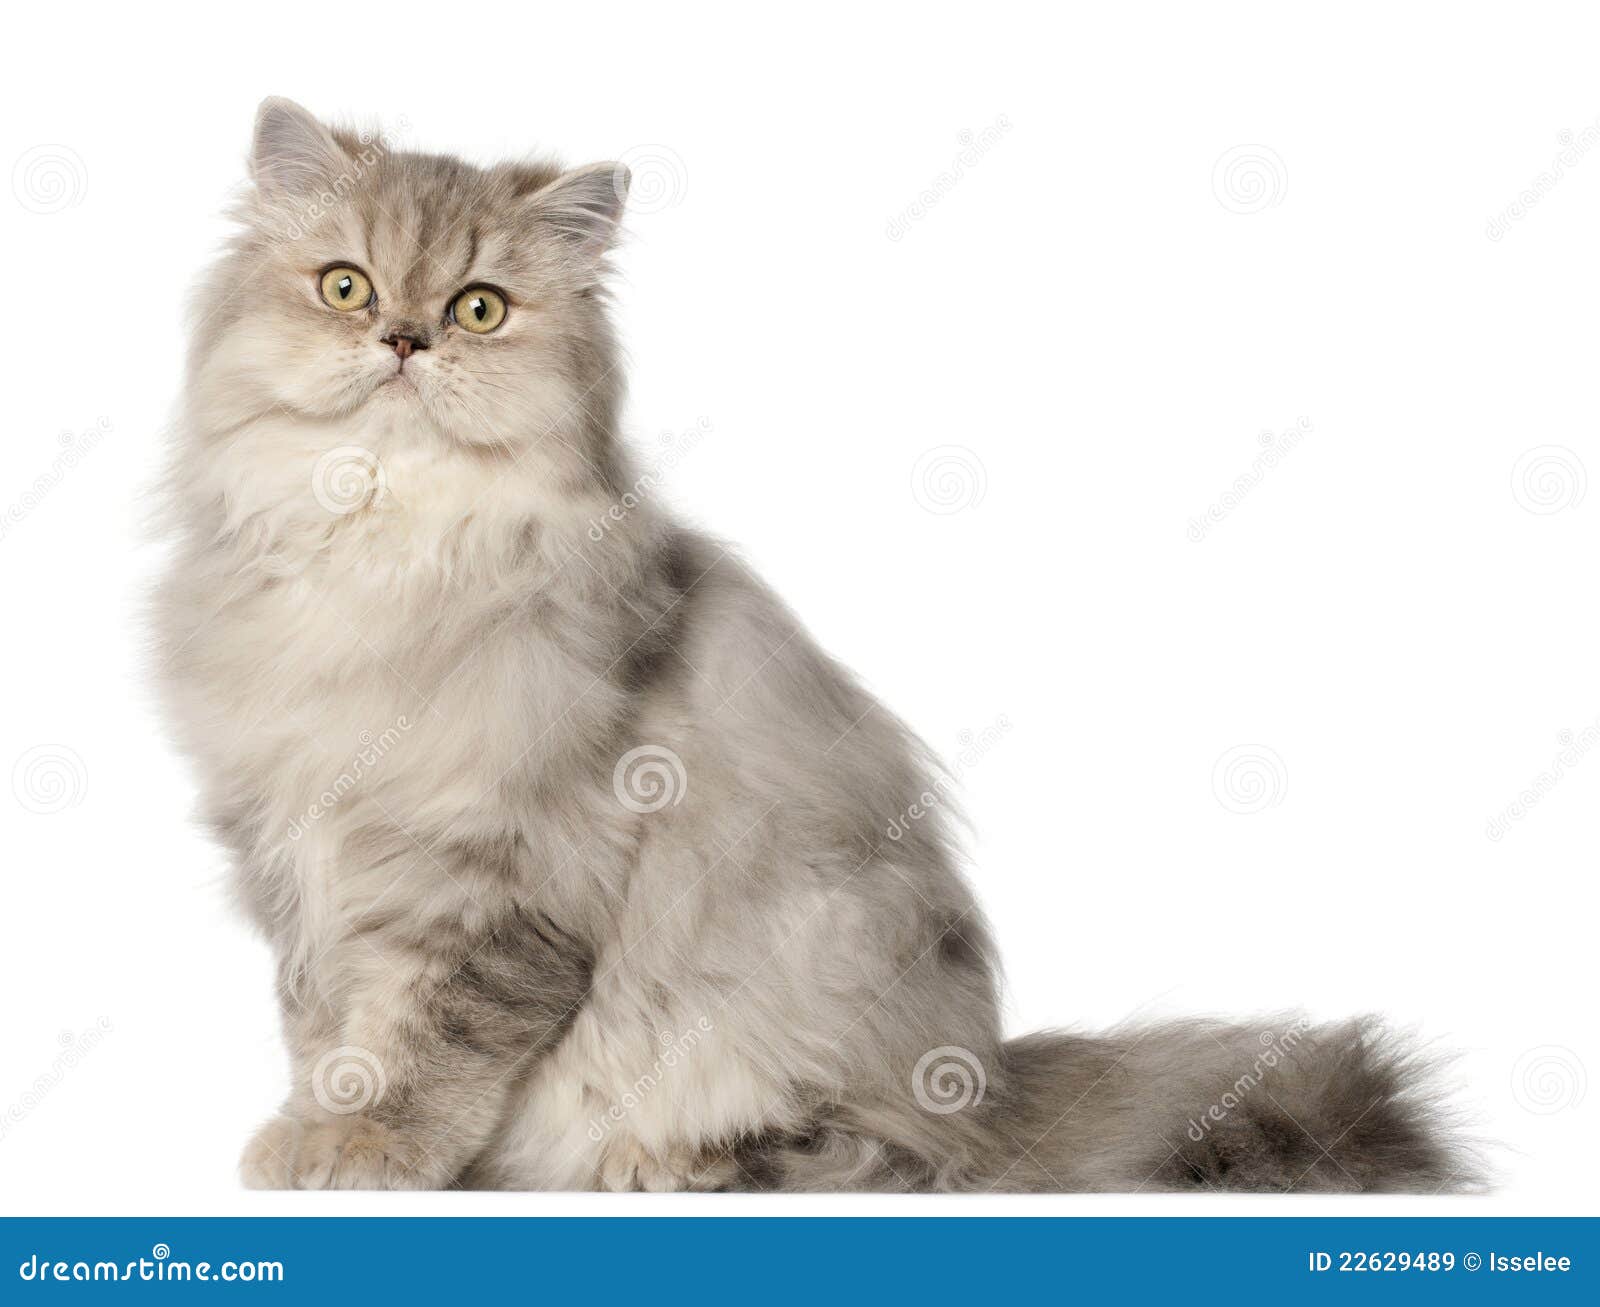 persian cat, sitting in front of white background